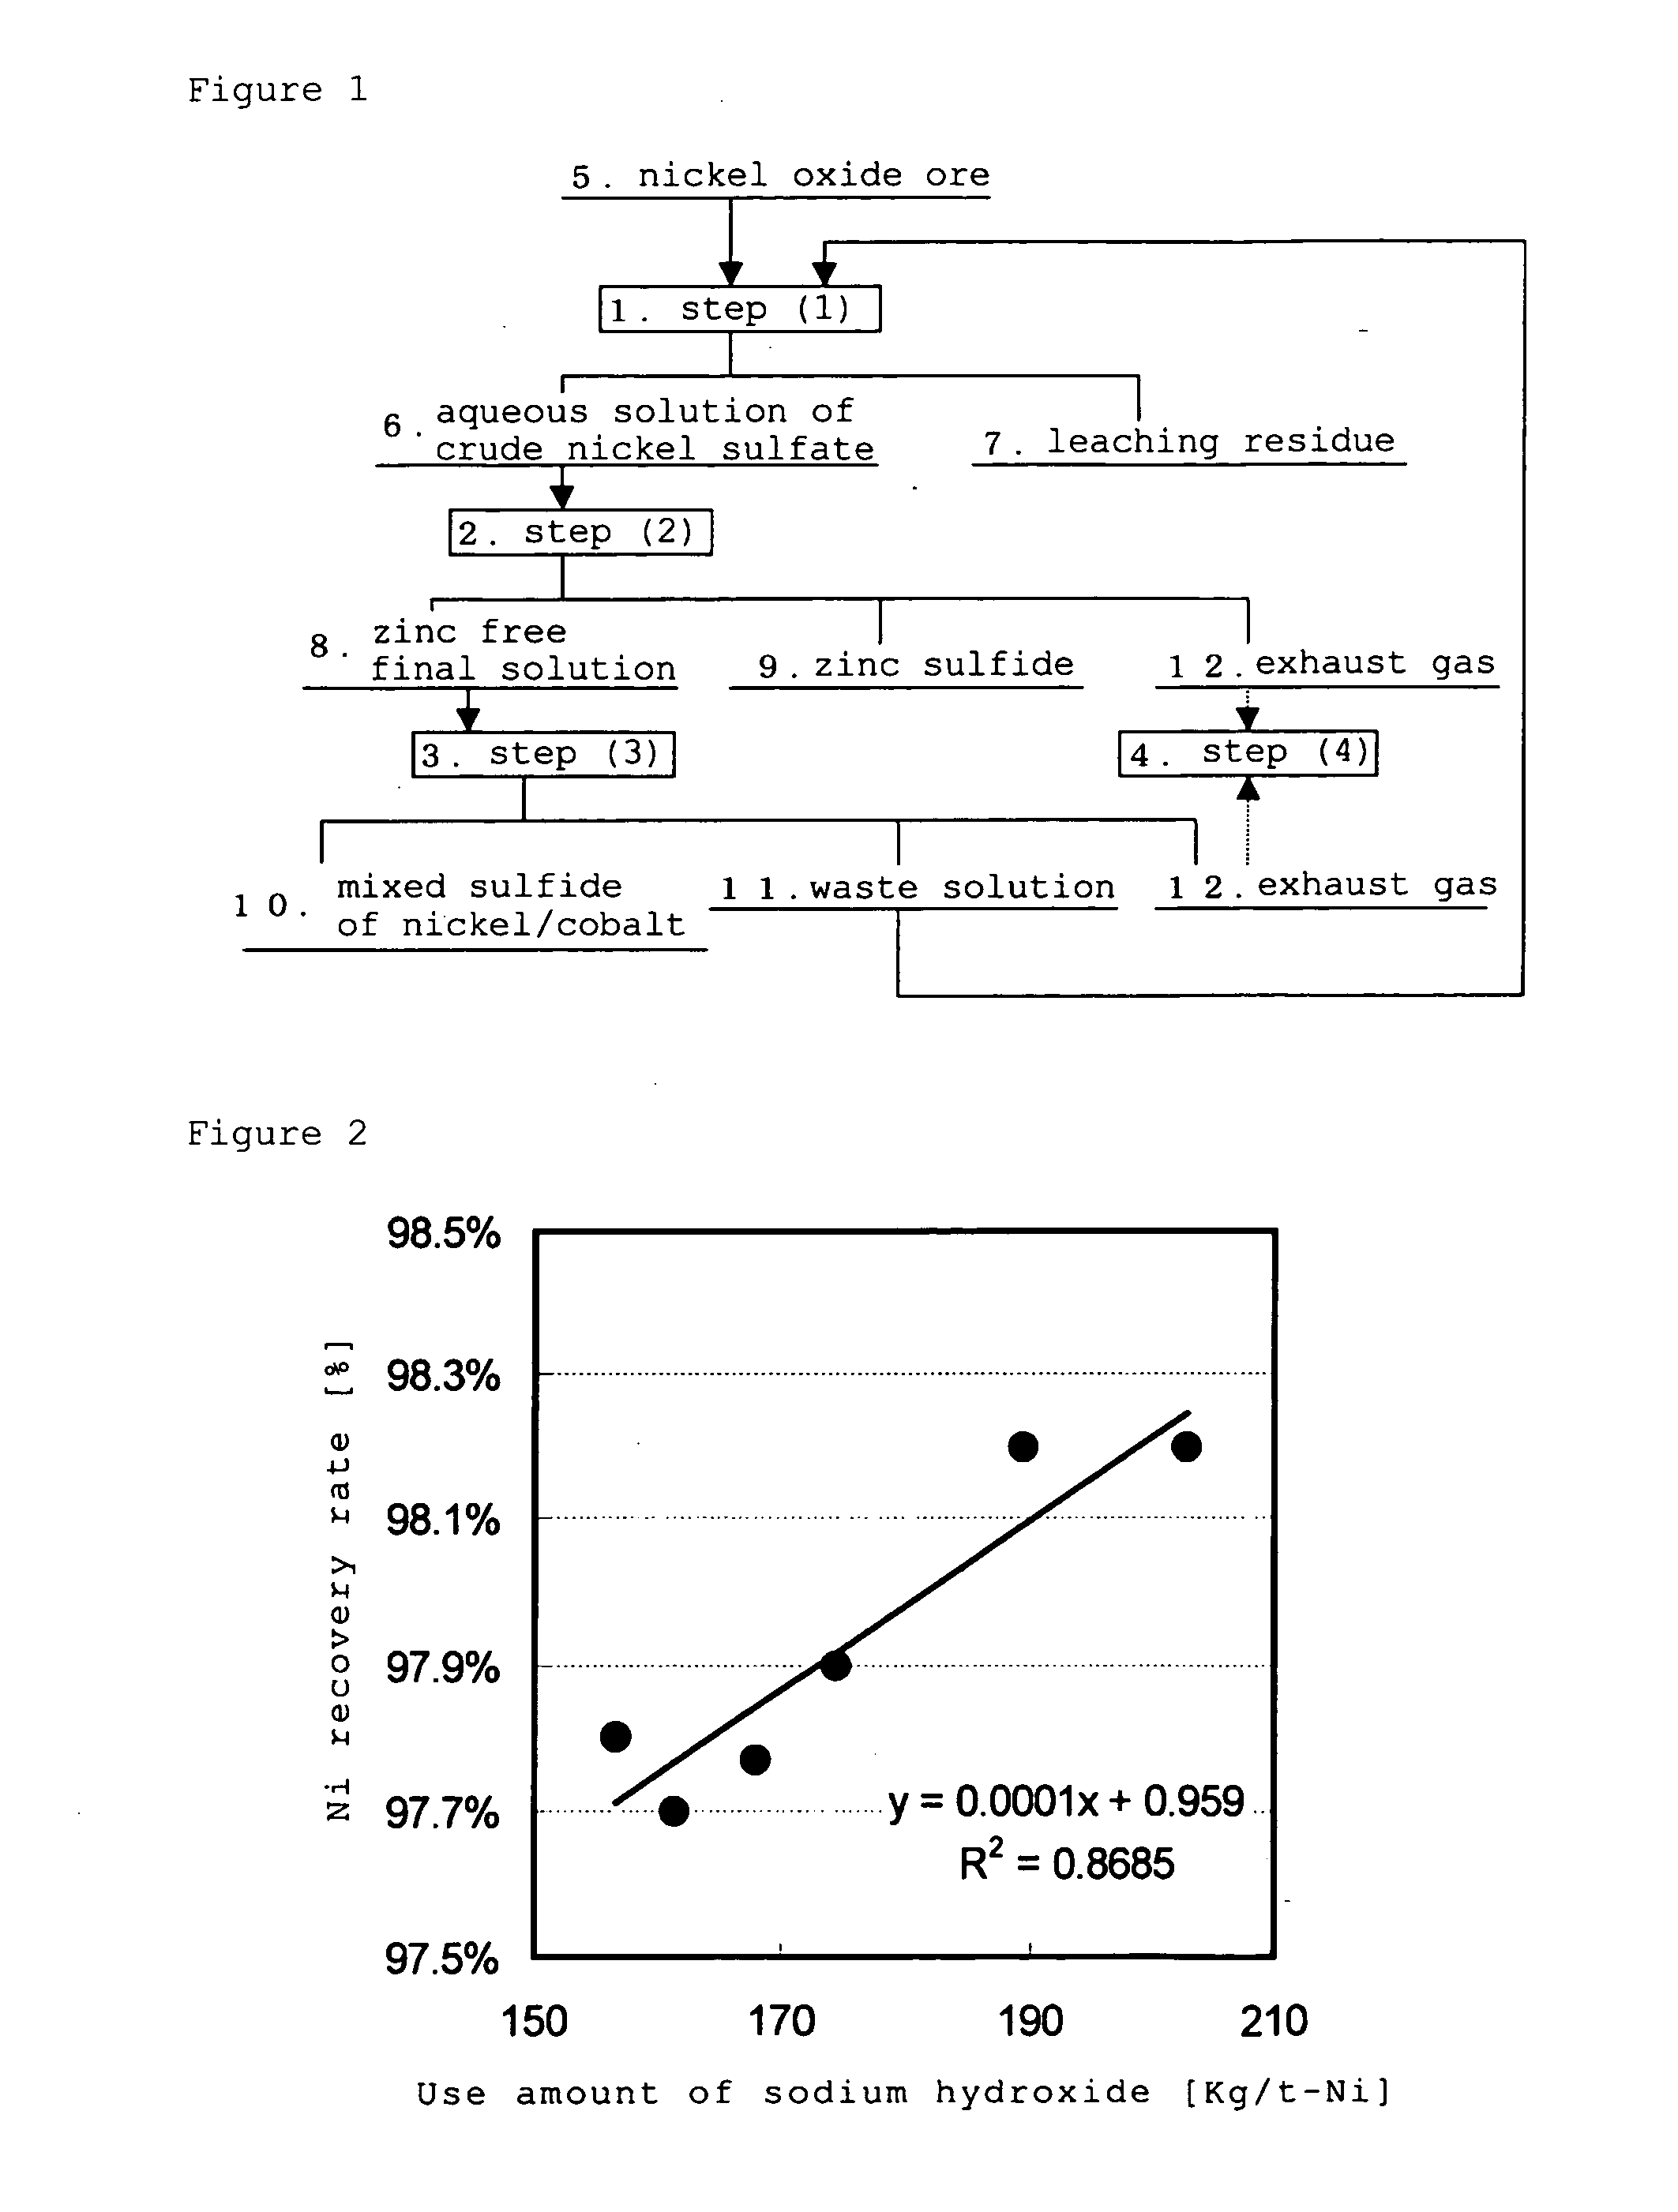 Hydrometallurgical process for a nickel oxide ore